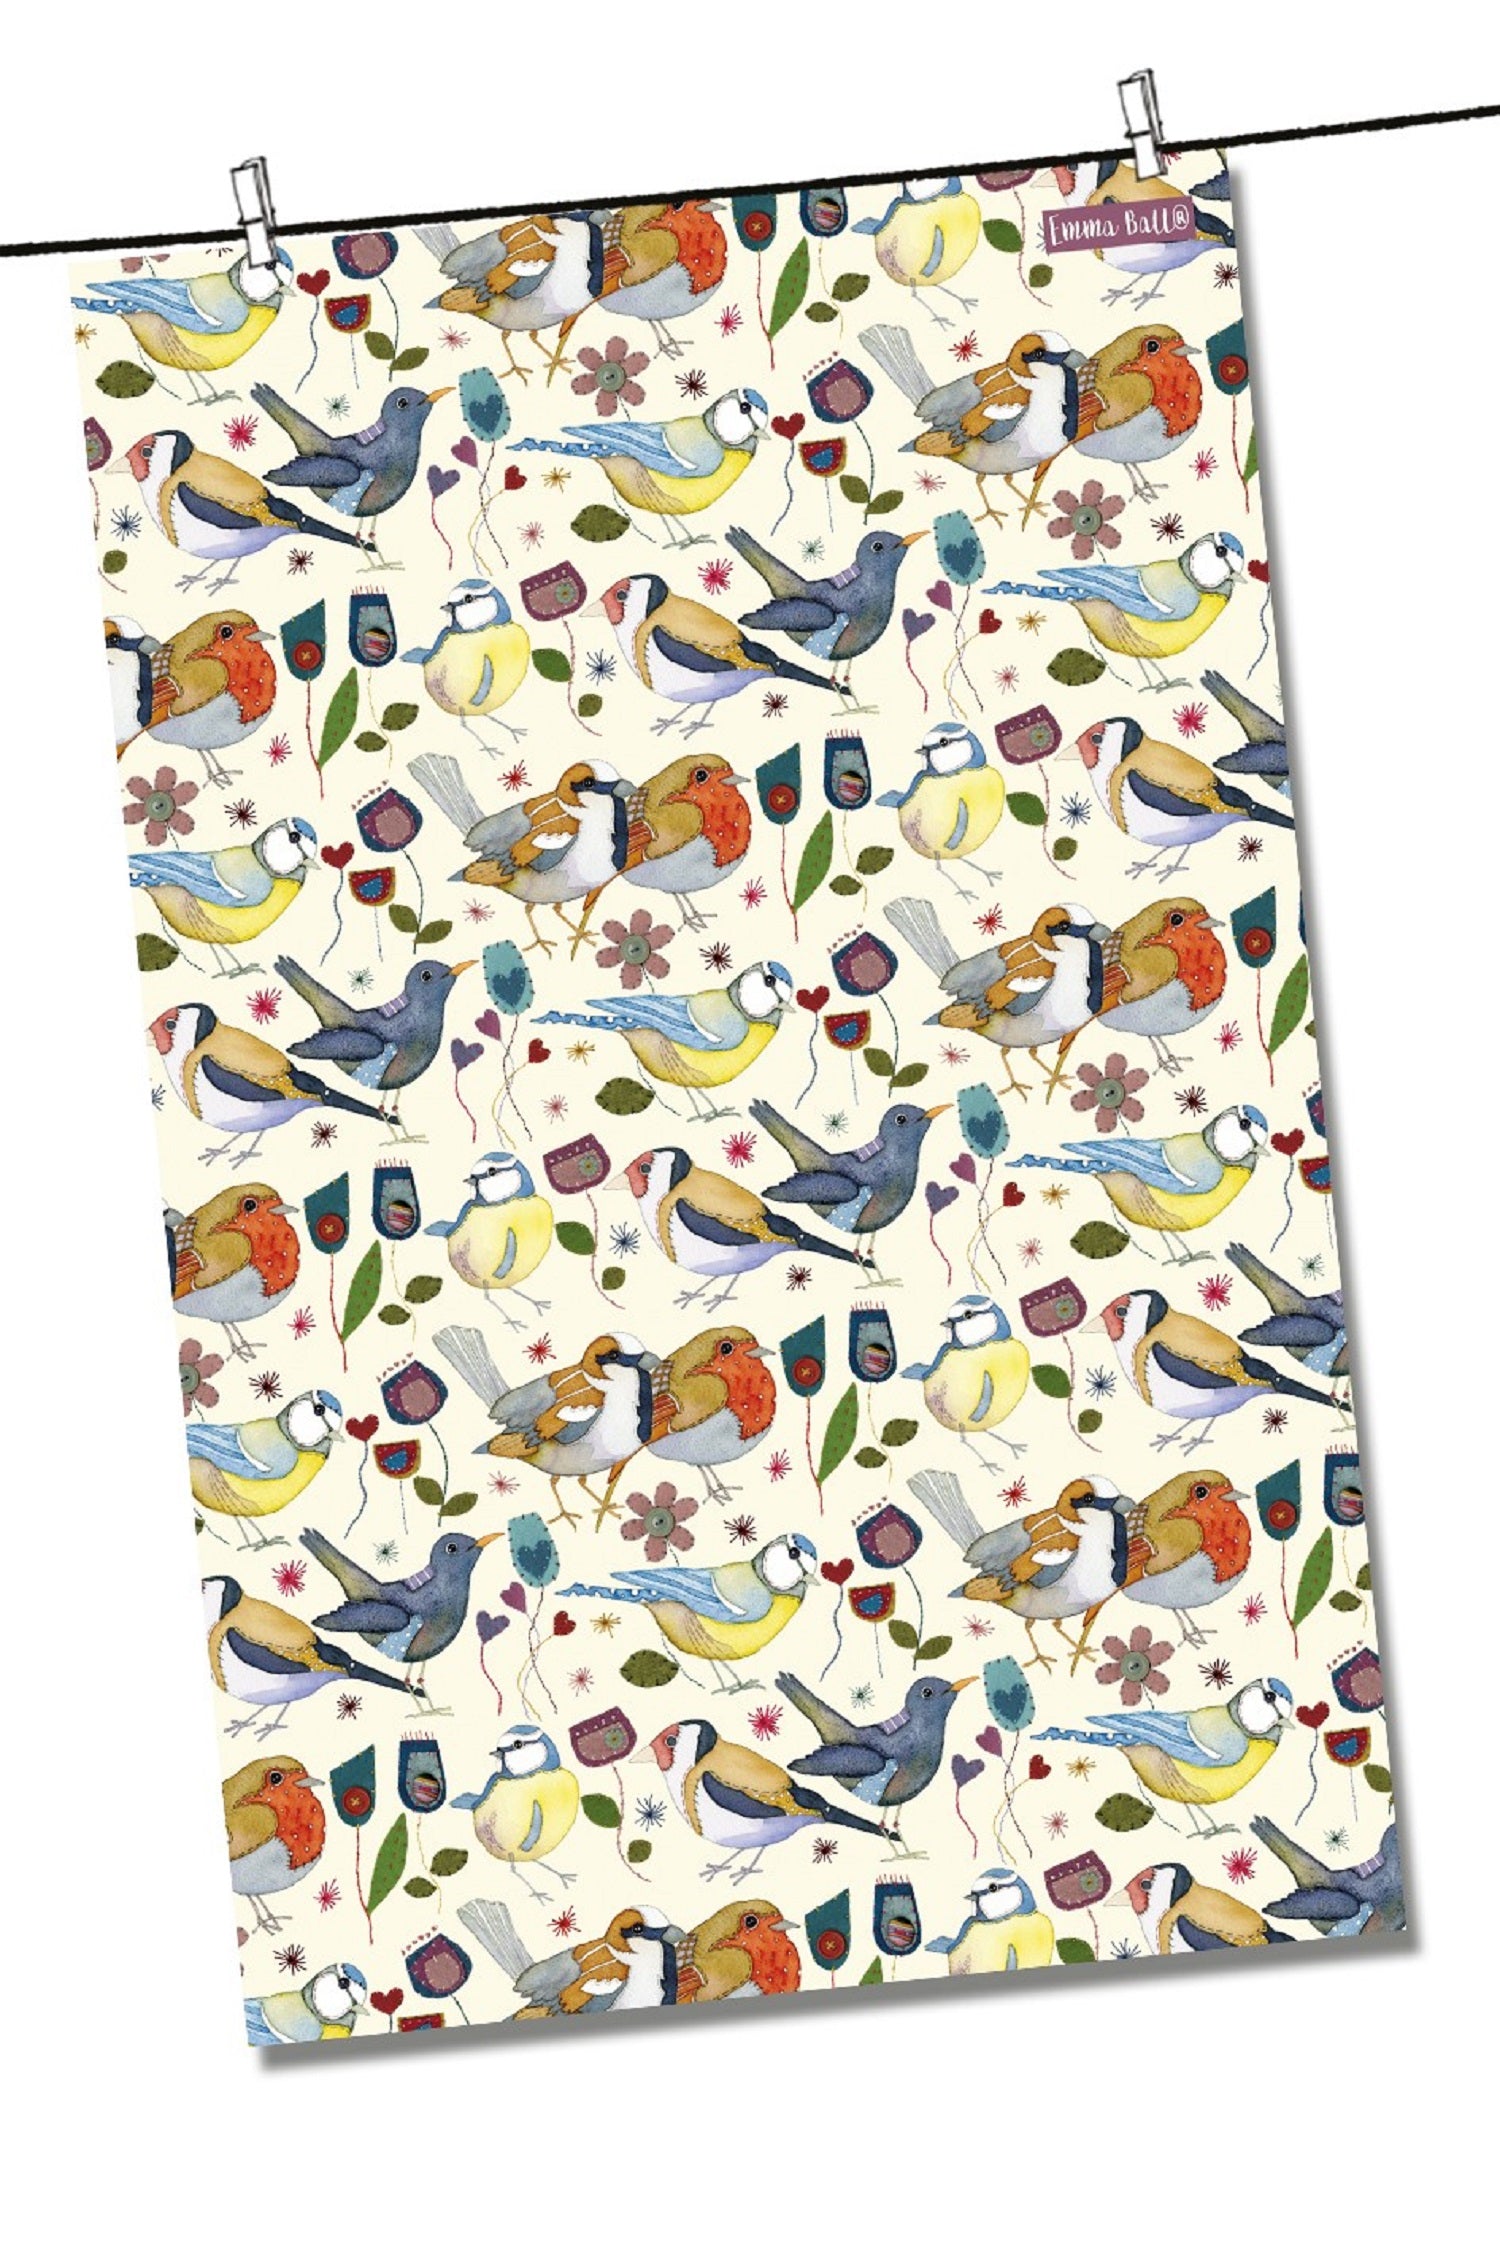 Emma Ball "Stitched Birdies", Pure cotton tea towel. Printed in the UK. - Home Landing